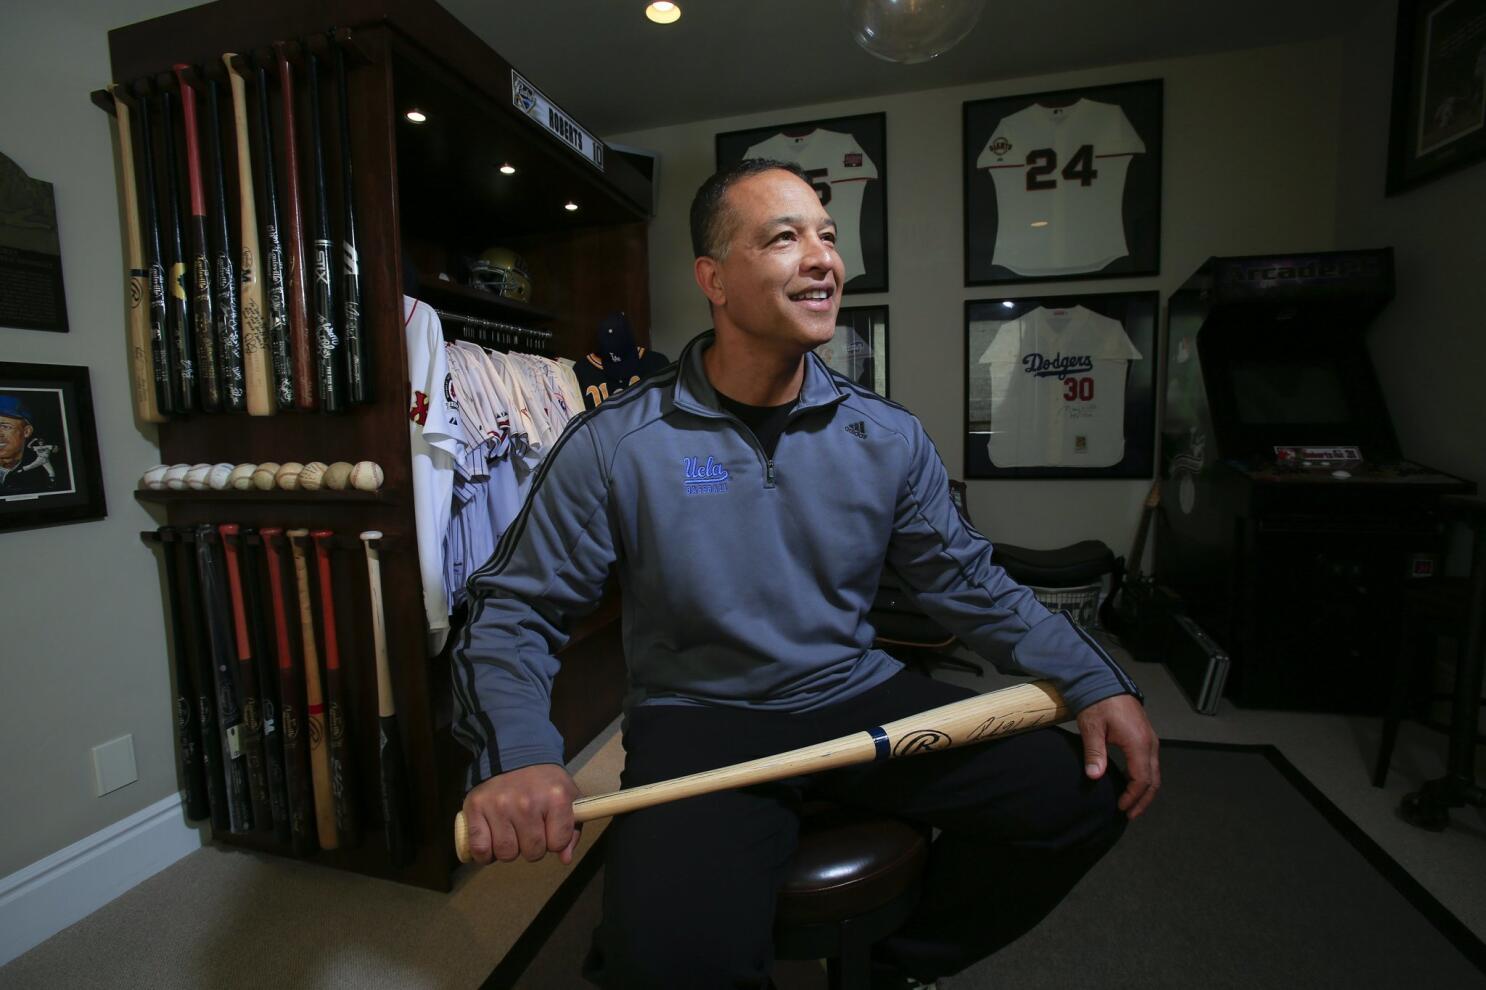 Dodgers manager Dave Roberts saving his sentimental side for